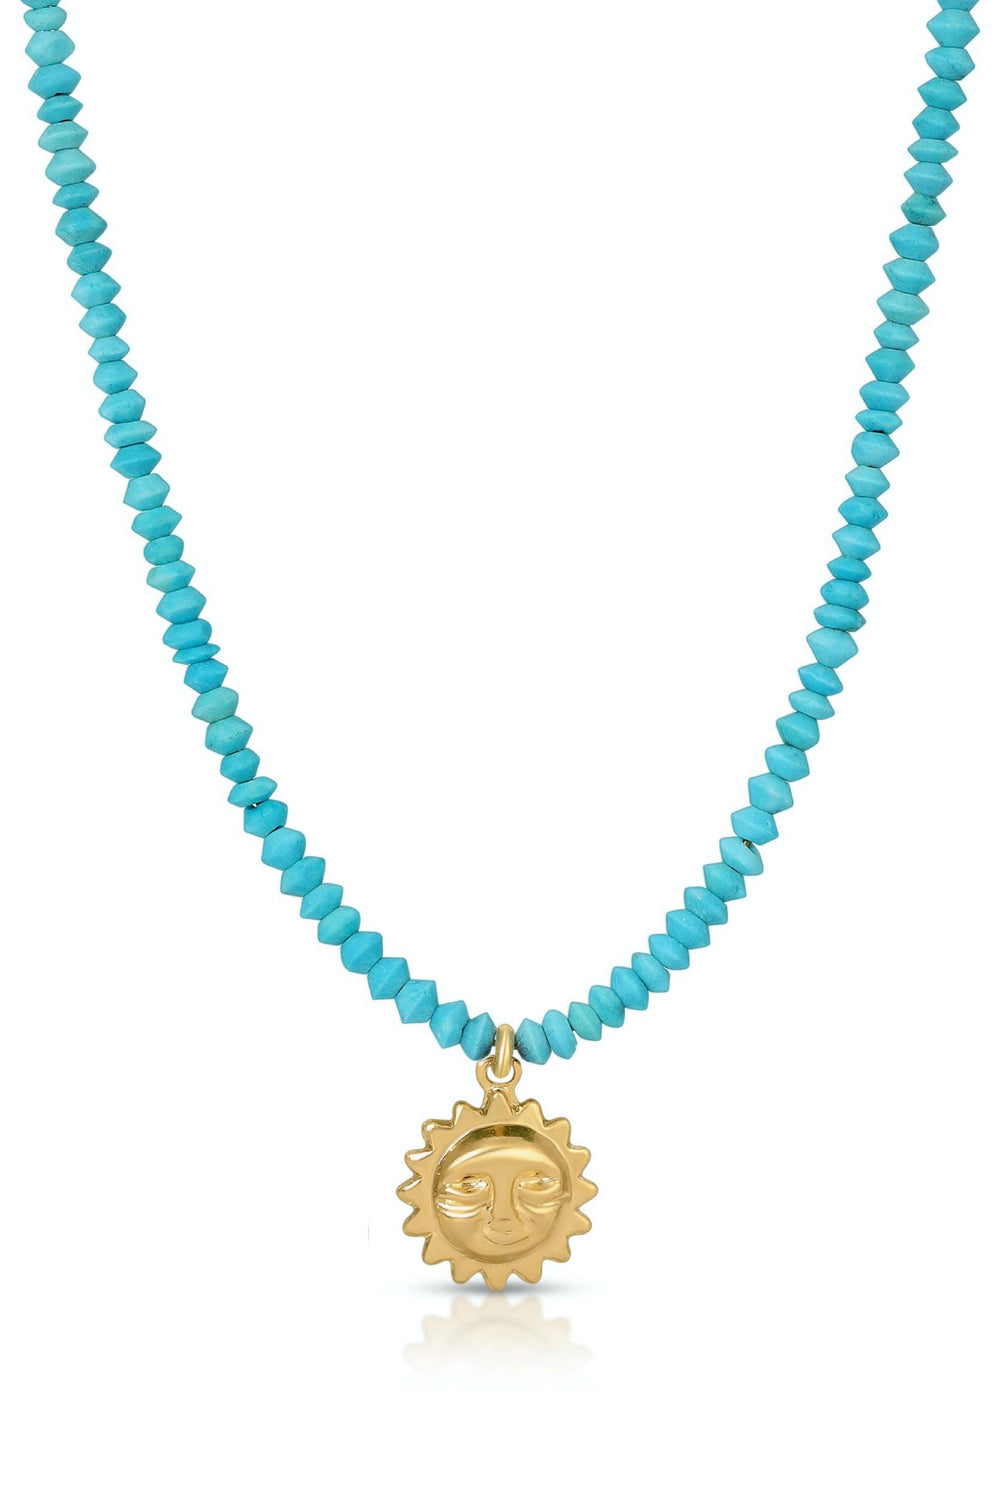 Turquoise Lil Miss Sunshine Necklace